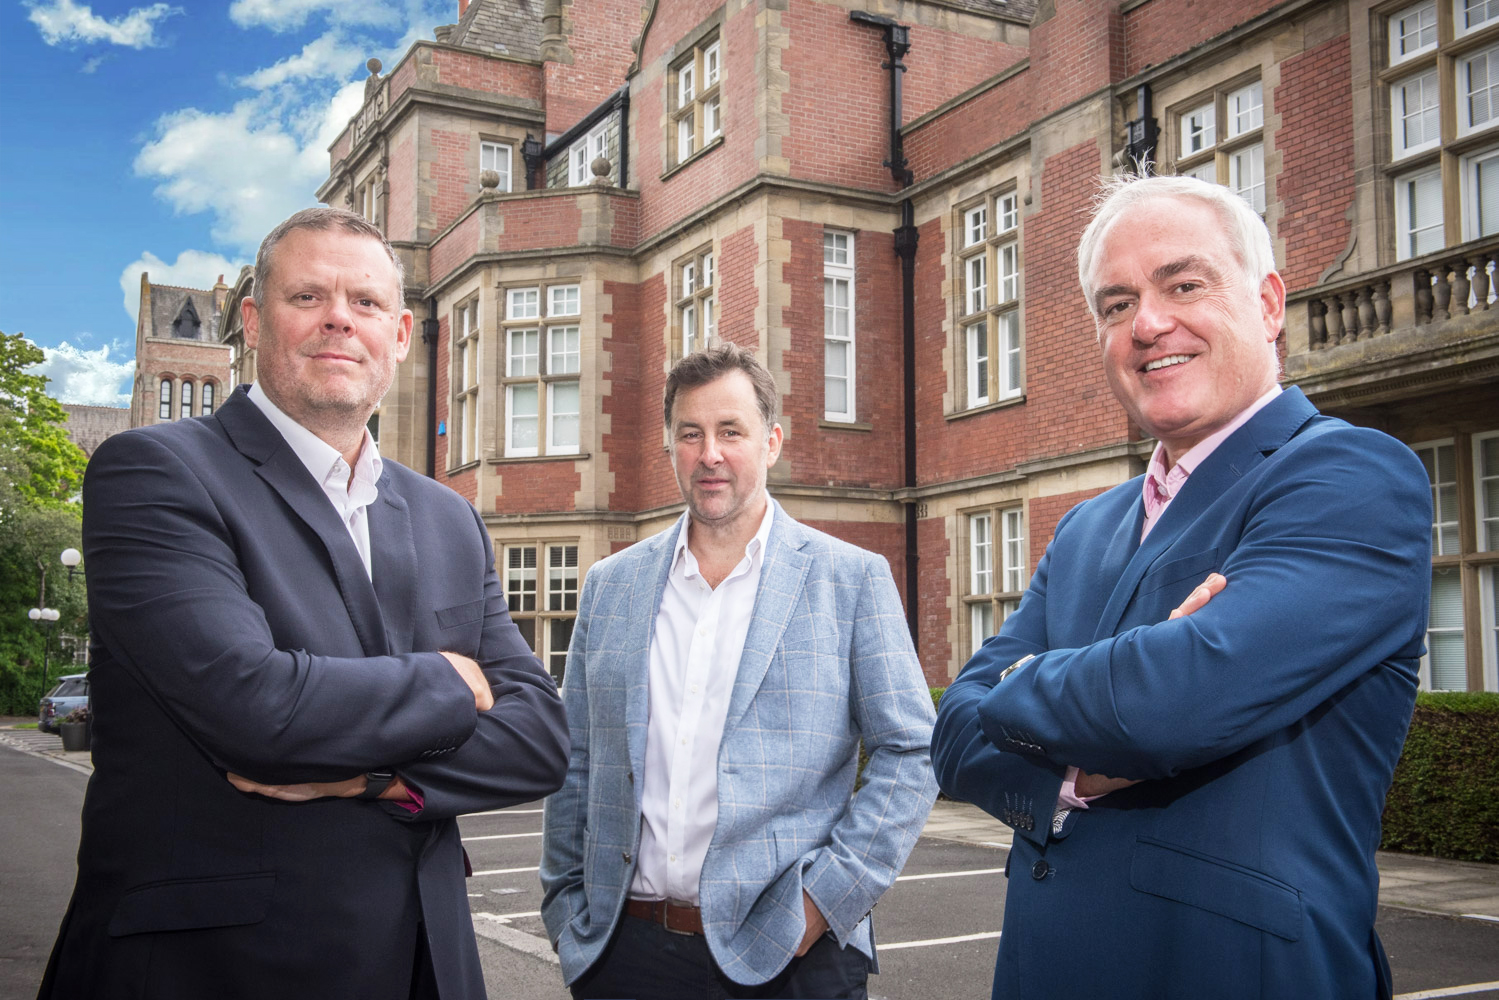 Adderstone Group launches specialist social housing division, Adderstone Living